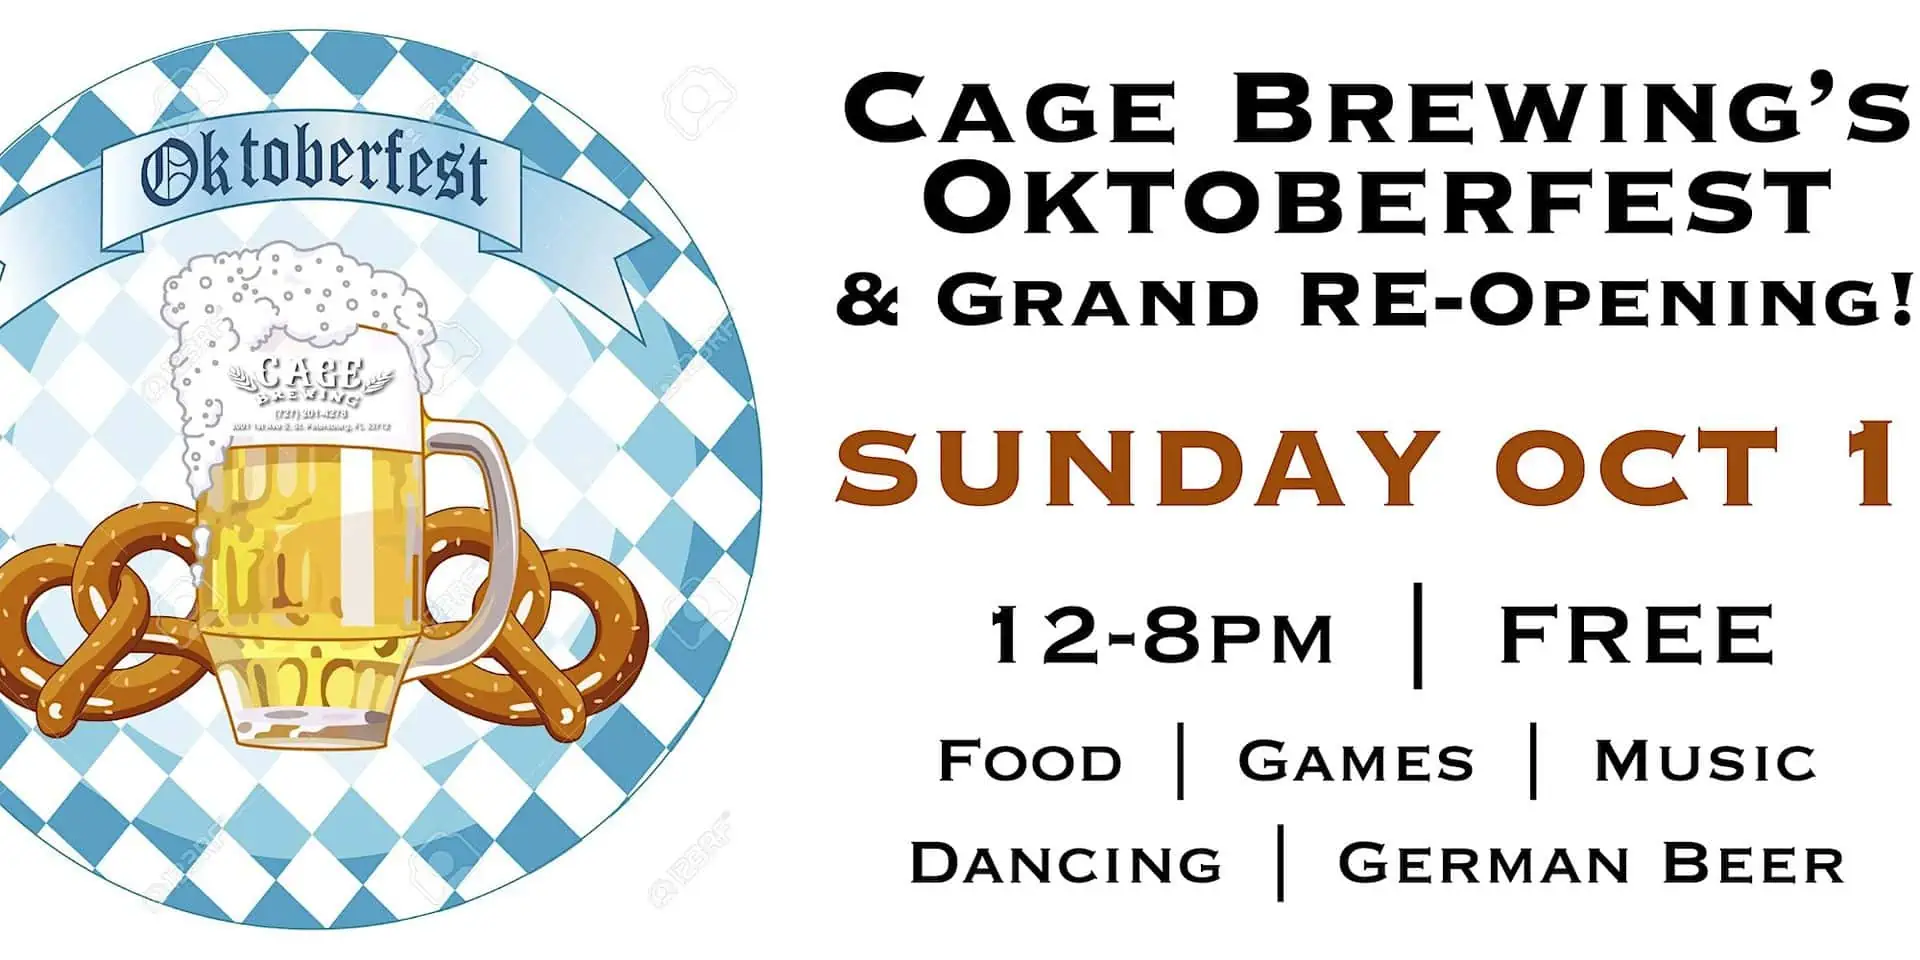 Cage Brewing's Oktoberfest + Grand Opening. Sunday October 12pm-8pm